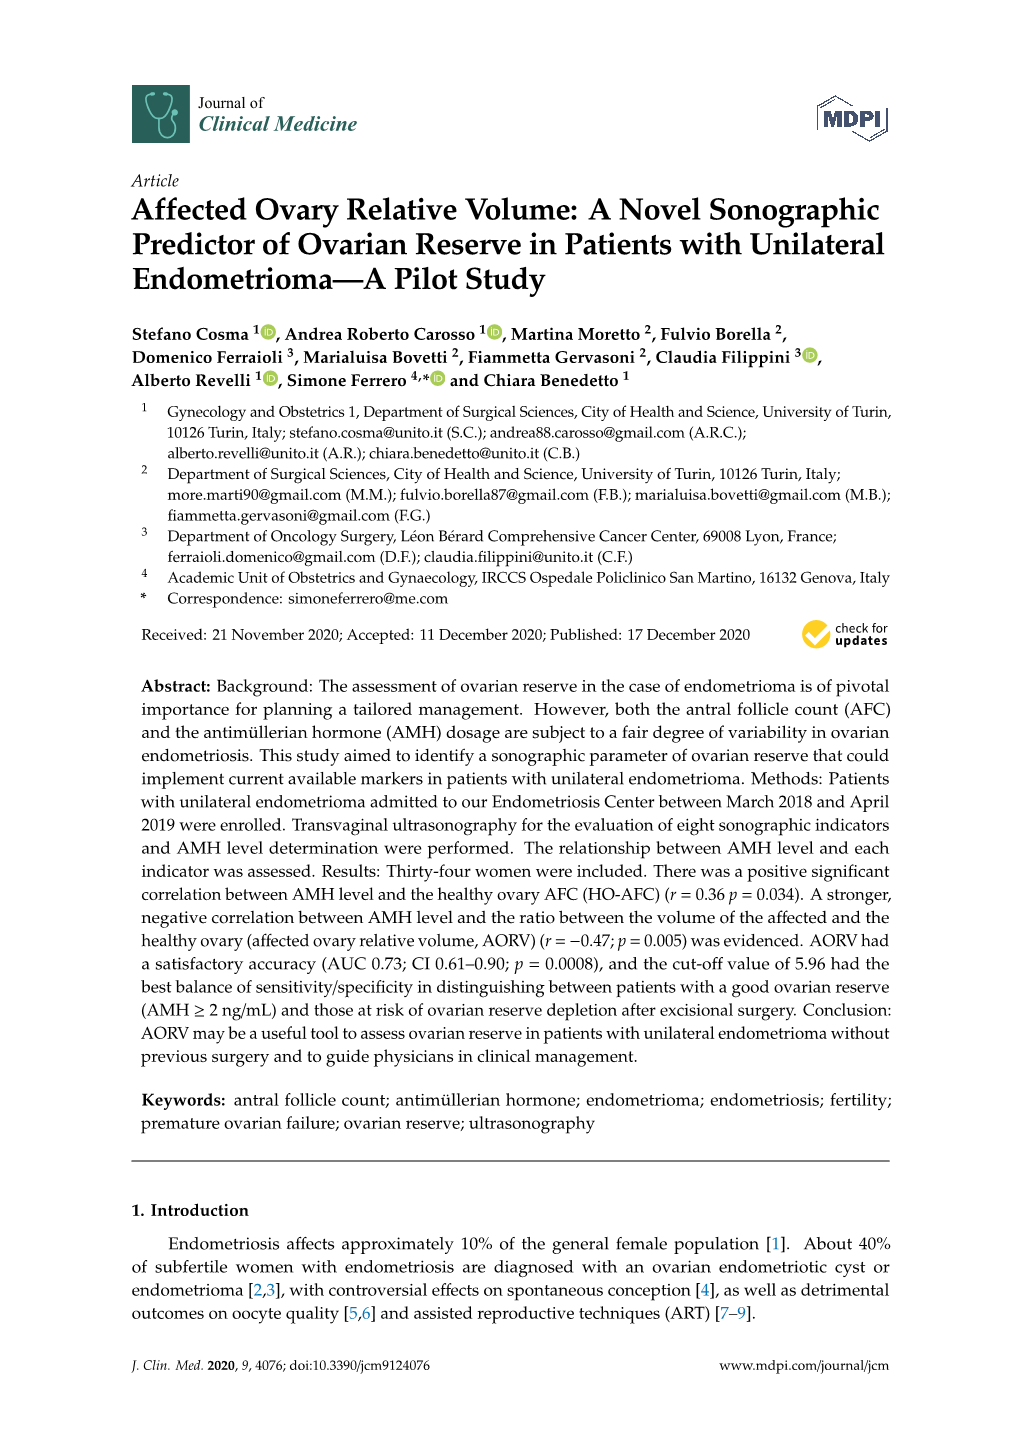 A Novel Sonographic Predictor of Ovarian Reserve in Patients with Unilateral Endometrioma—A Pilot Study